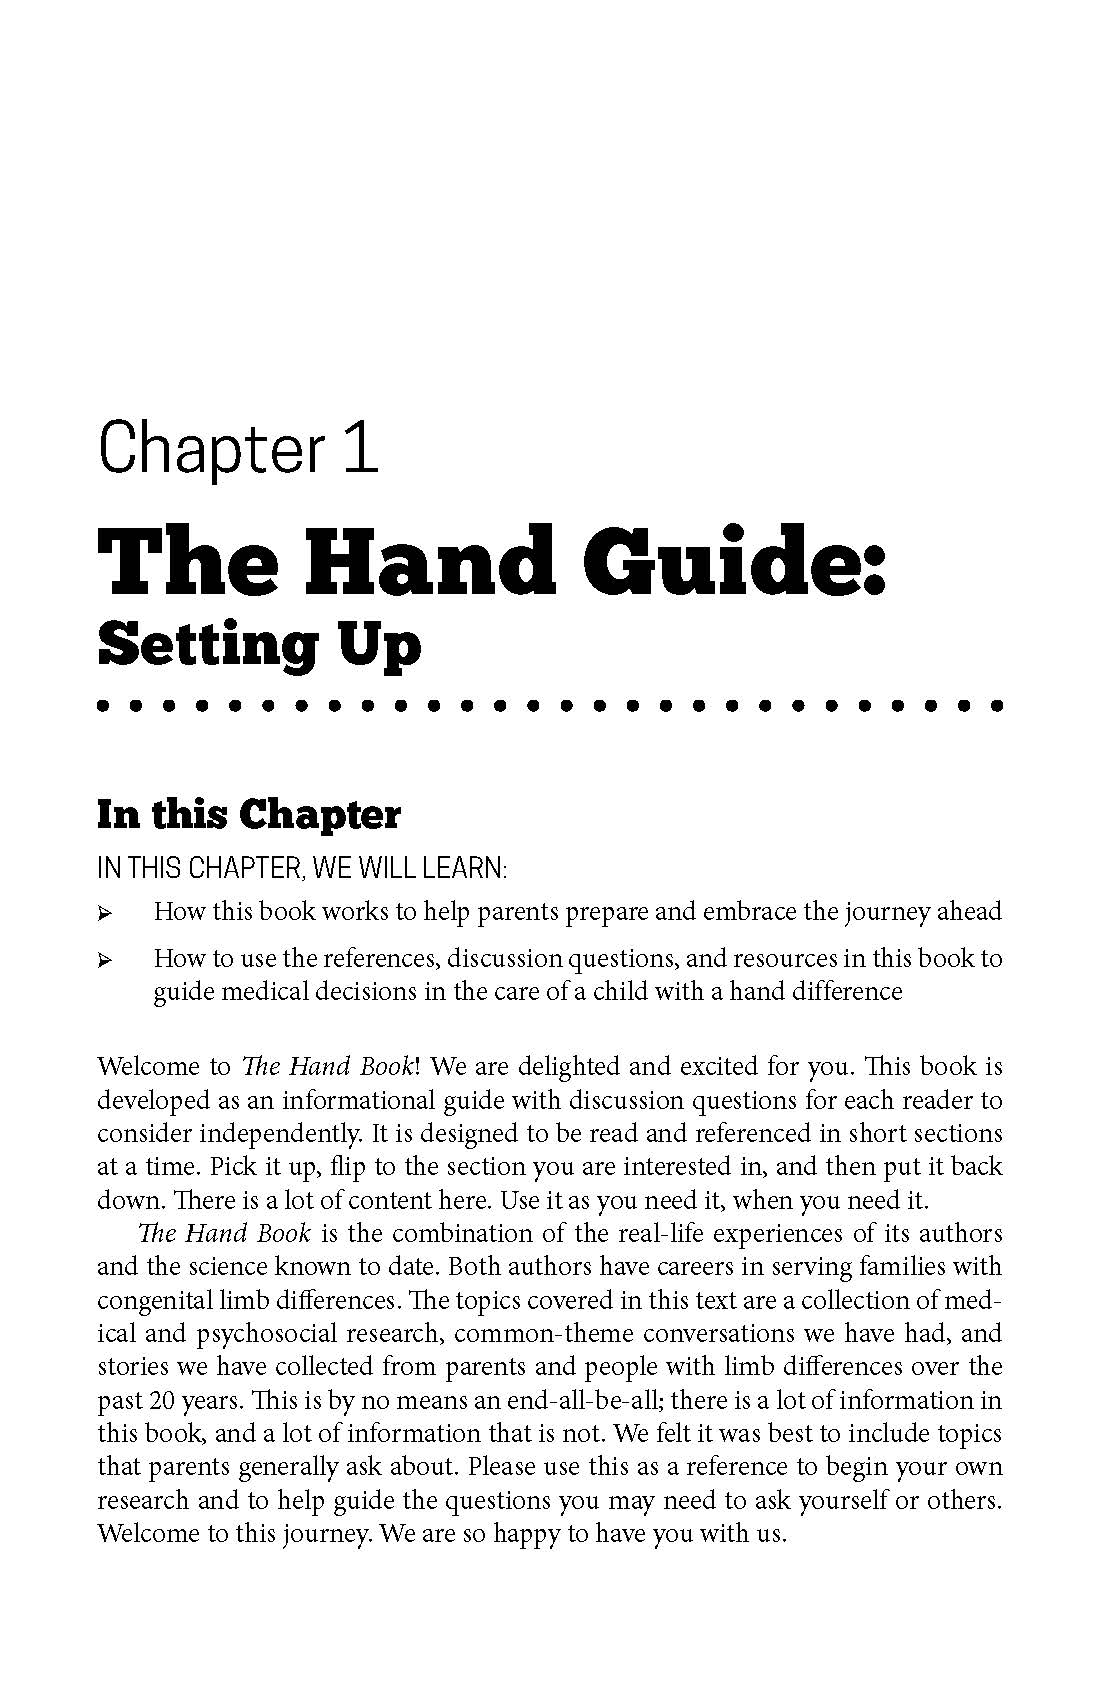 The Hand Book: An Informational Guide for Parents of Children with Hand Differences